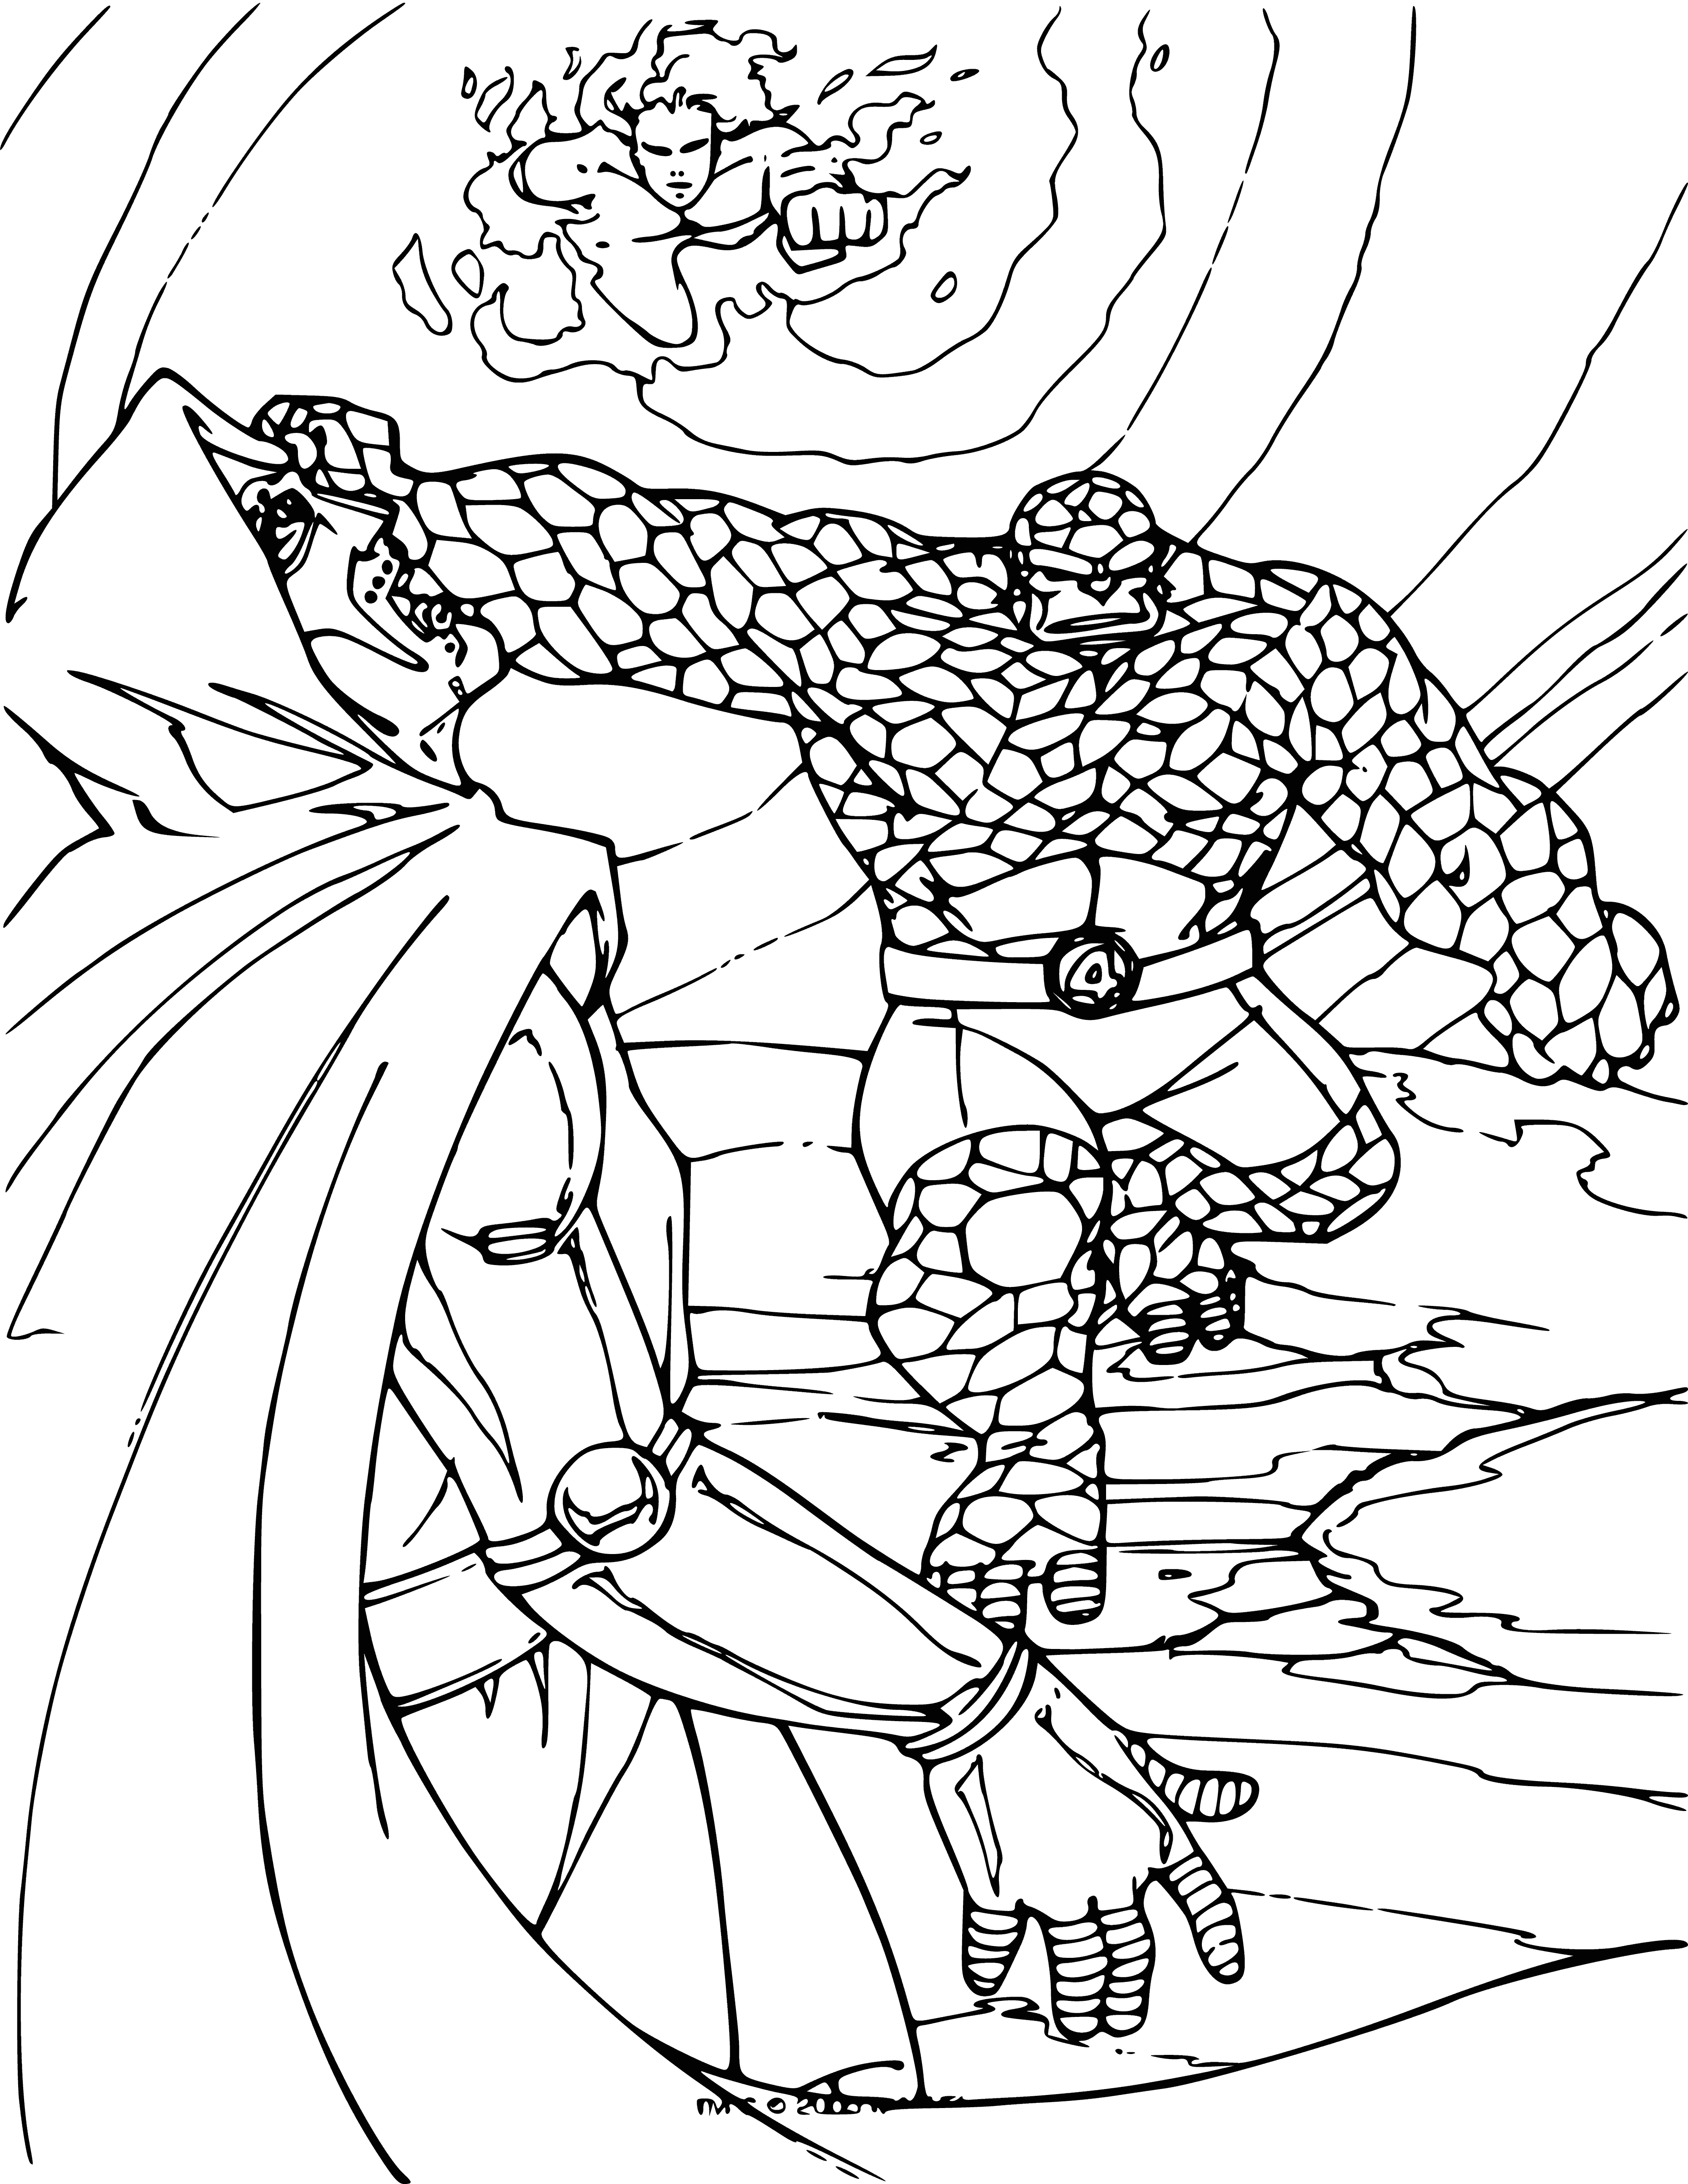 coloring page: The Fantastic Four are a team of four superheroes in Marvel Comics - Mr. Fantastic, The Invisible Woman, Human Torch and the Thing.